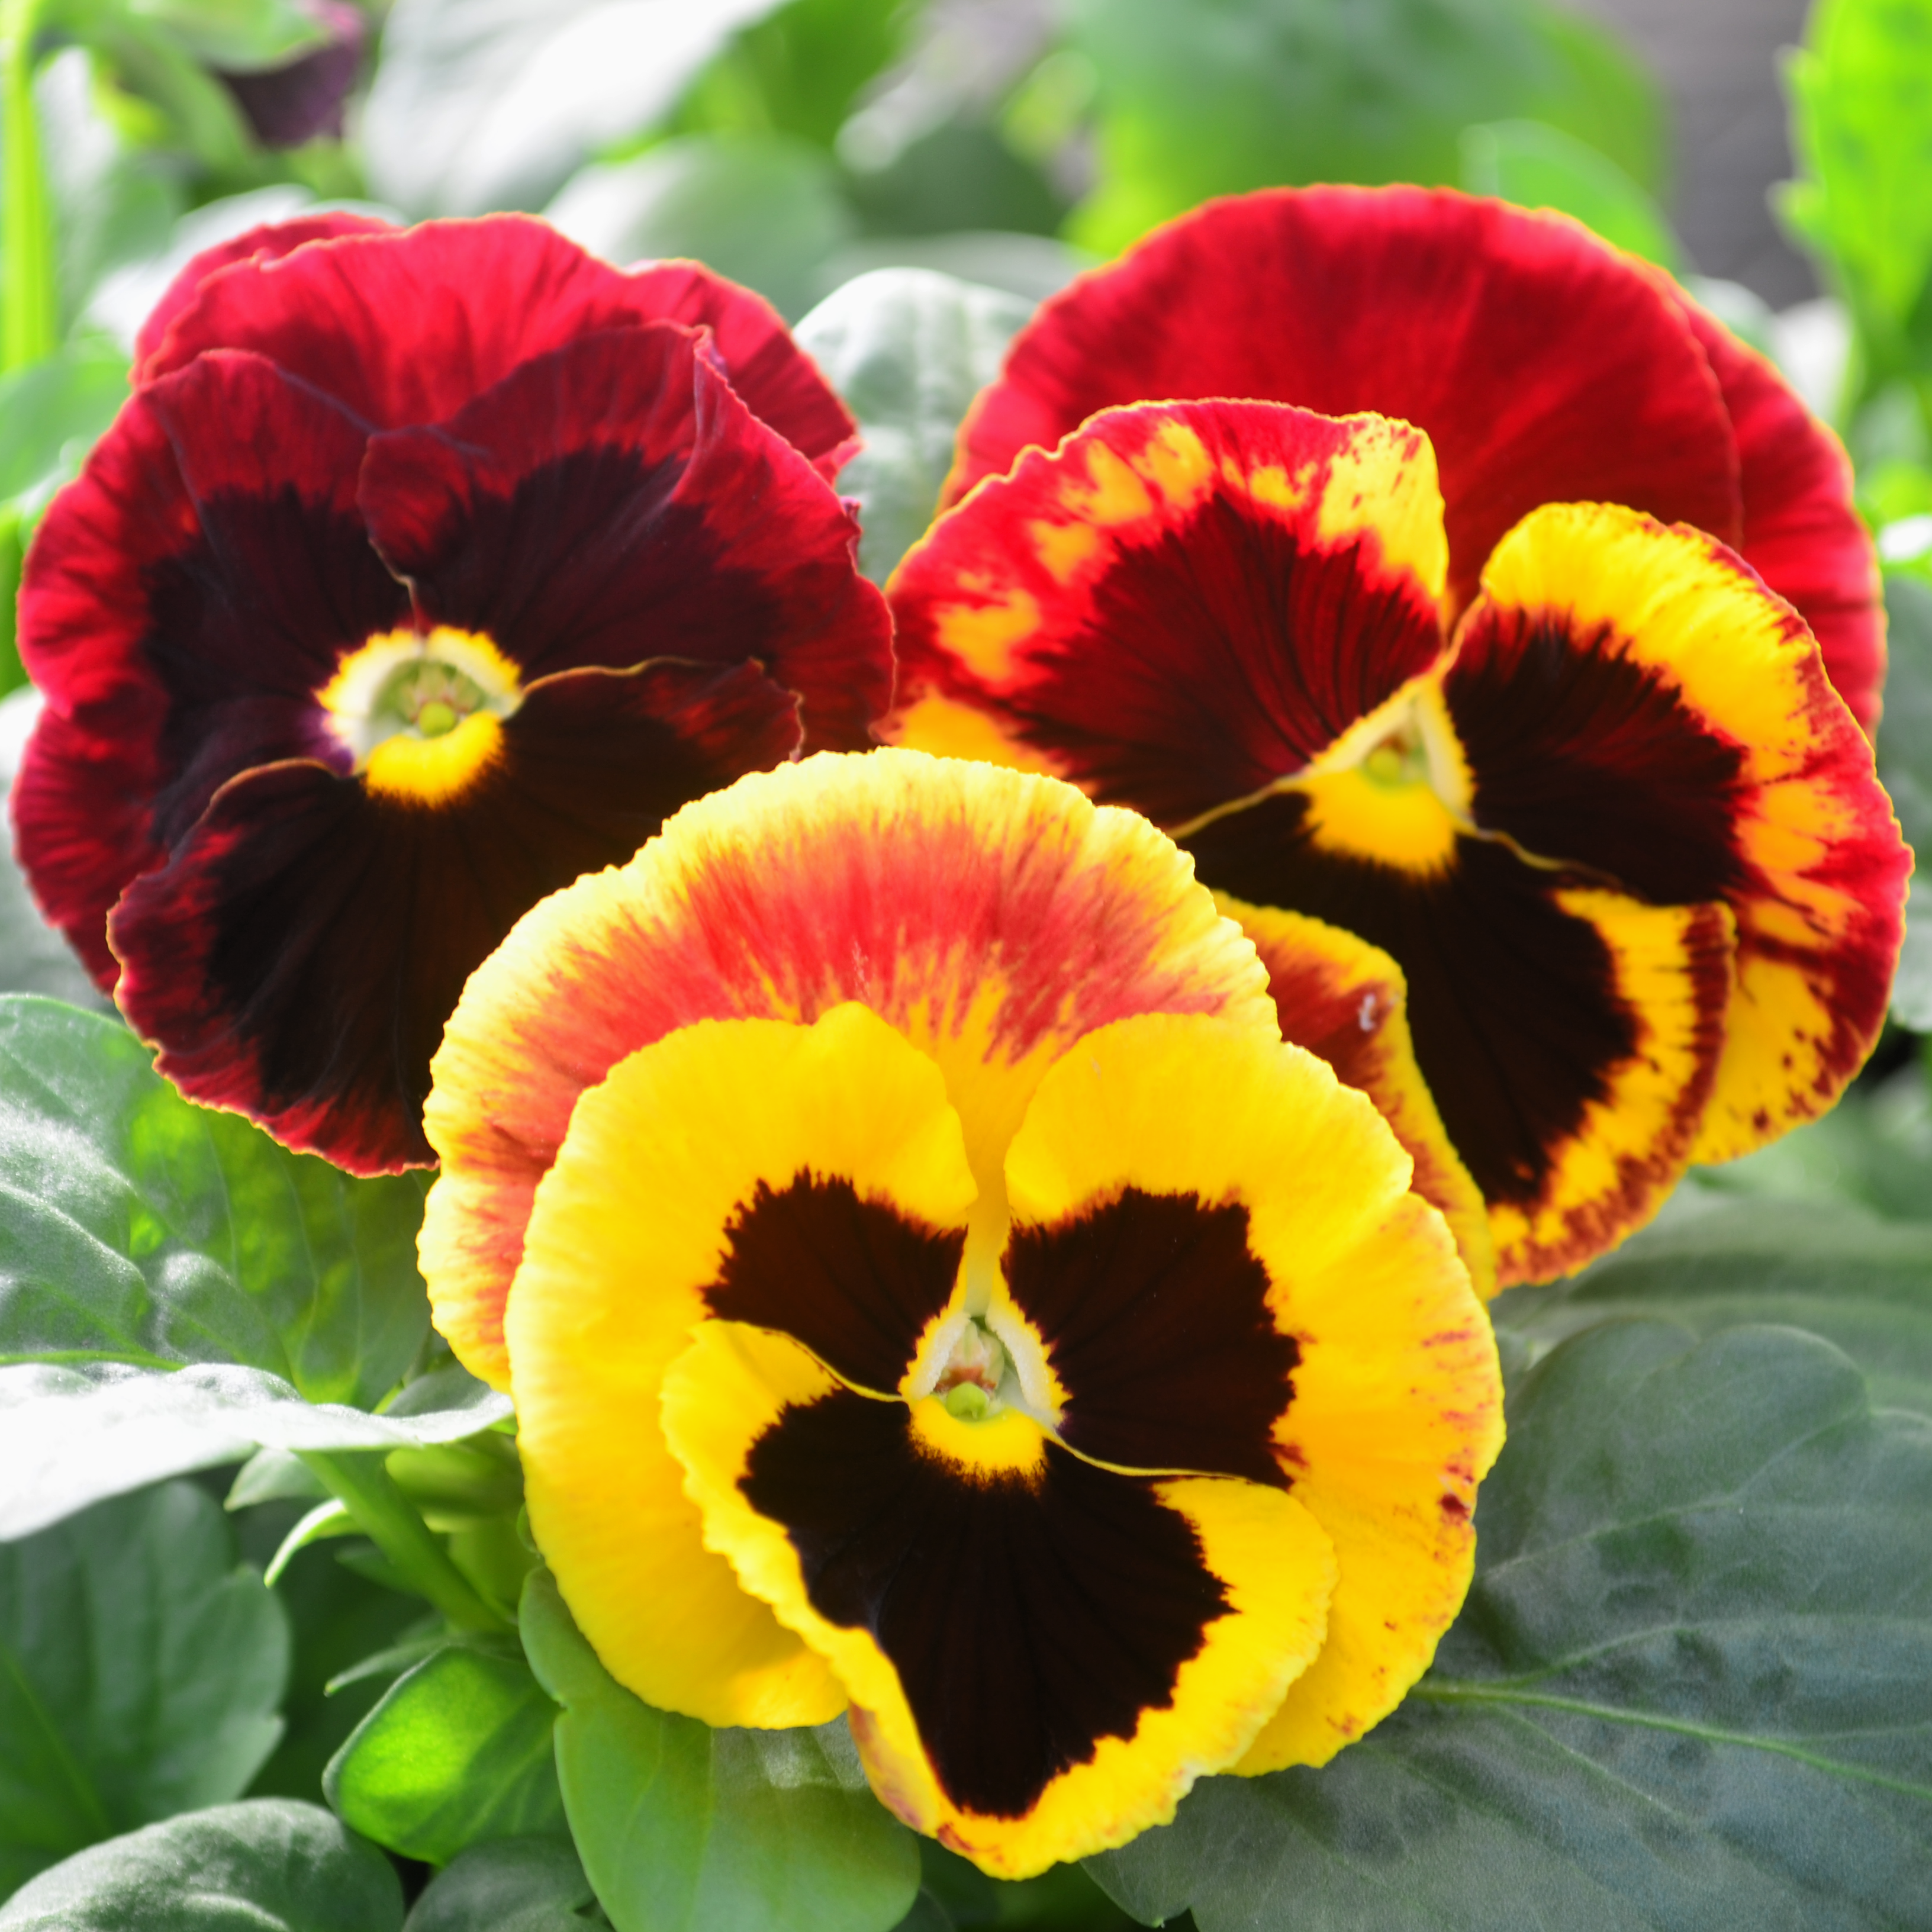 Viola wittrockiana Colossus 'Fire' - Pansy from Hillcrest Nursery